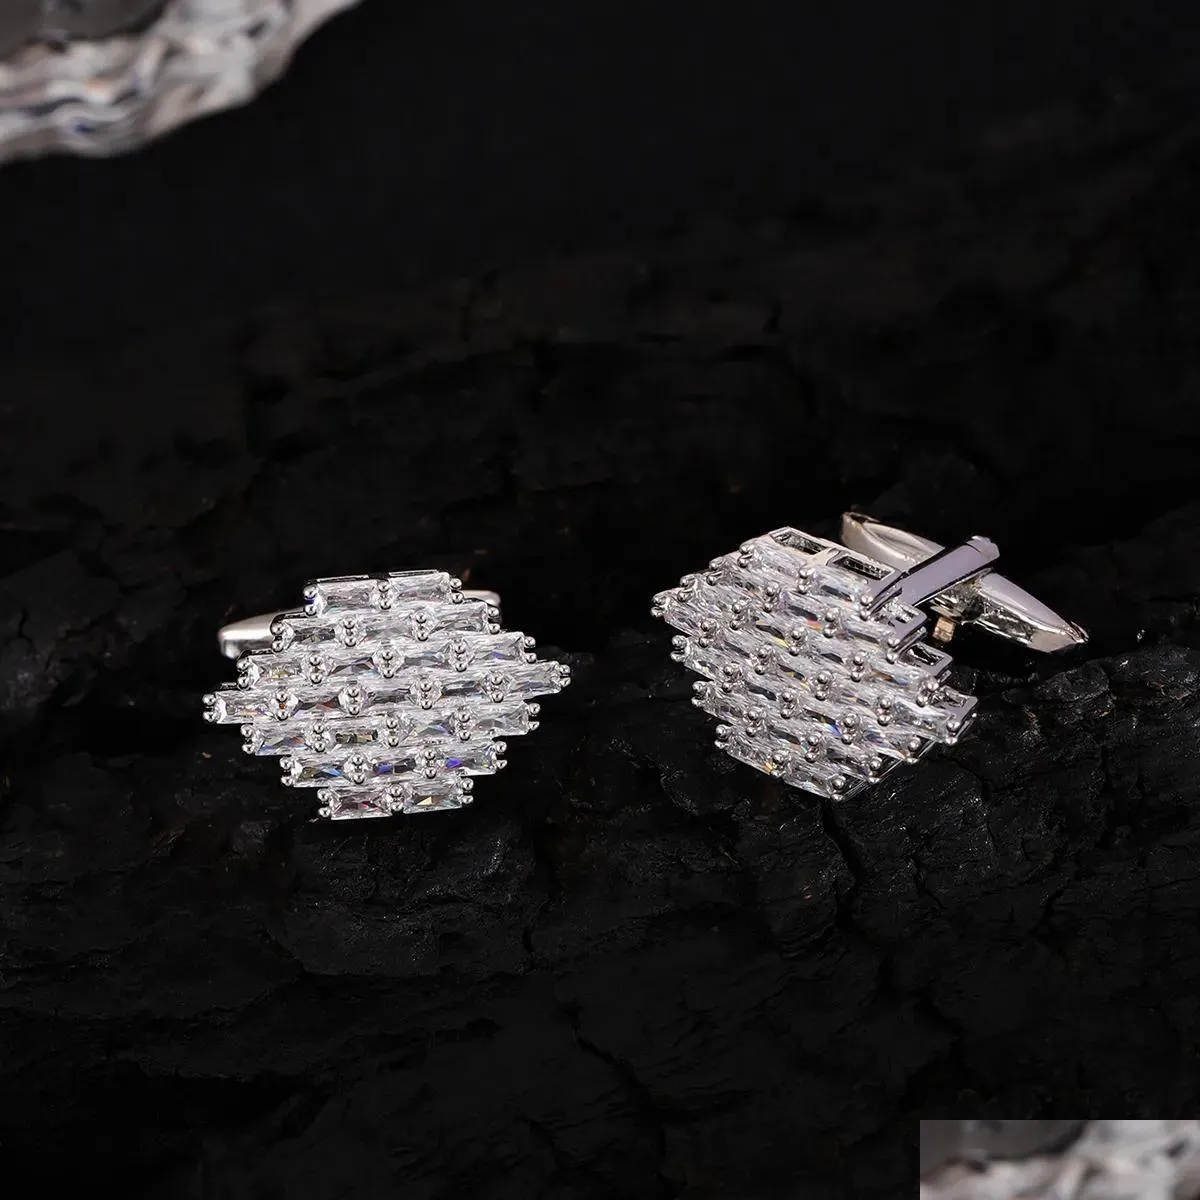 Cuff Links The Rhombus Cufflinks With Diamond Inlay A Unique Accessory To Showcase Mens Noble Character And Exquisite Taste Drop Del